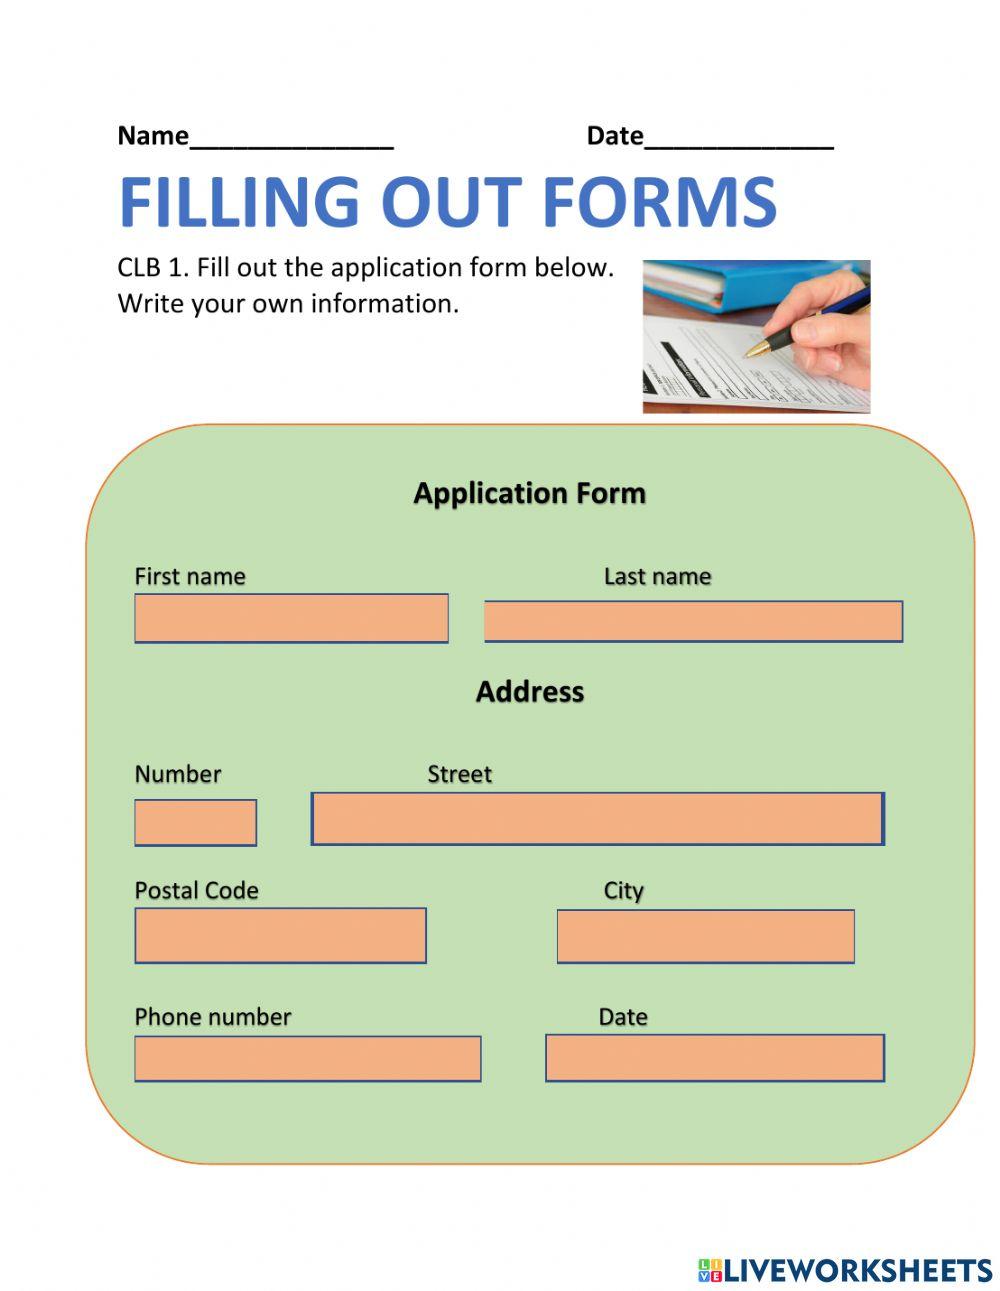 Personal Information Form Apr 2021(CLB 1)